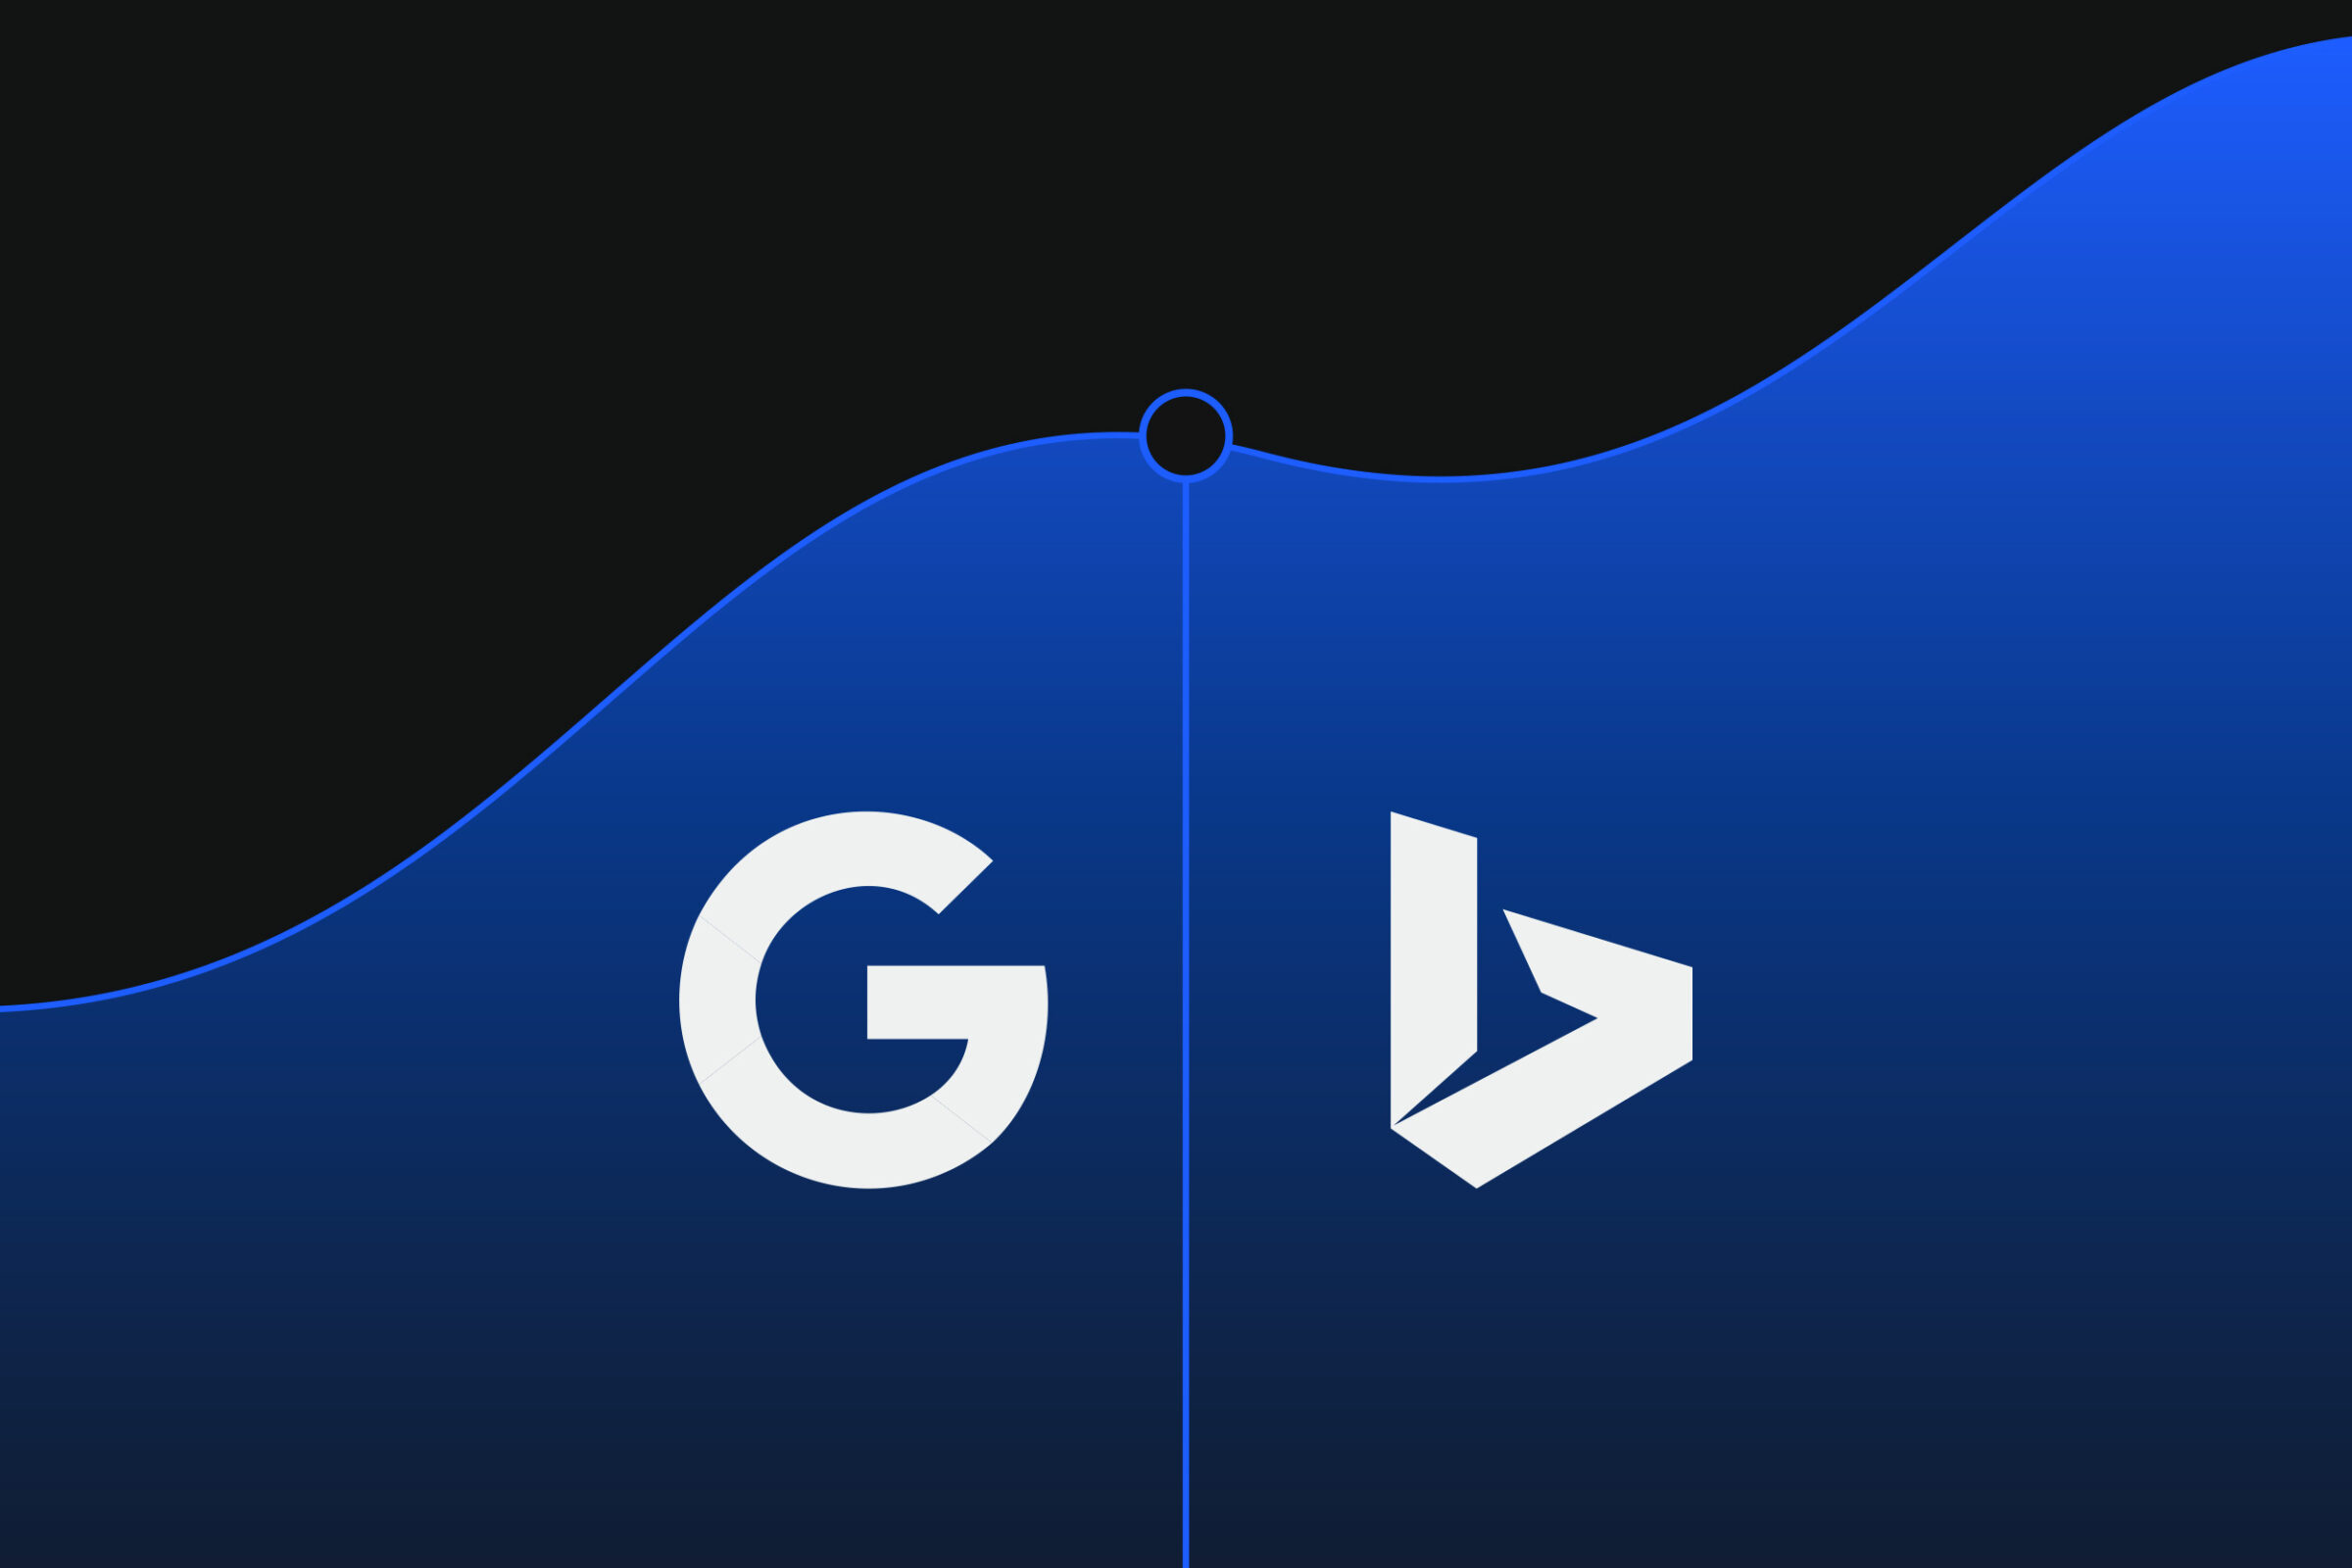 A black and blue image with the Google and Bing logos displayed.